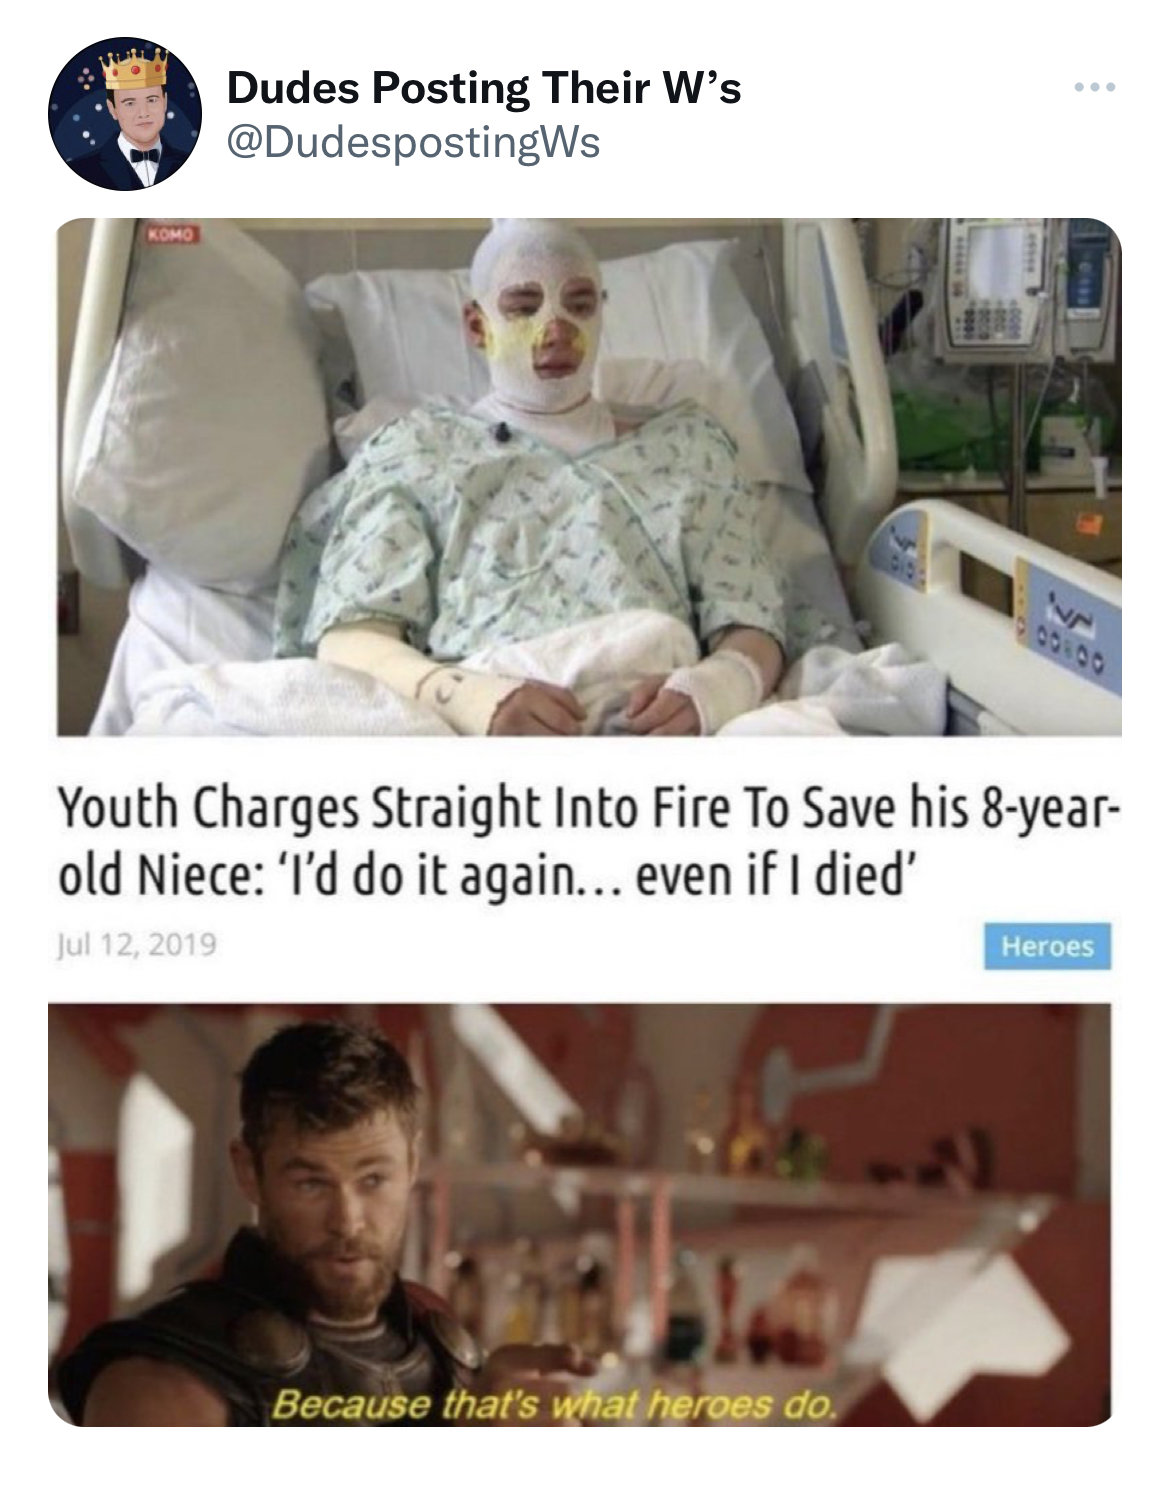 Dudes posting their wins - photo caption - Ddes Posting Their W's Youth Charges Straight Into Fire To Save his 8year old Niece 'I'd do it again... even if I died' Because that's what heroes do Heroes